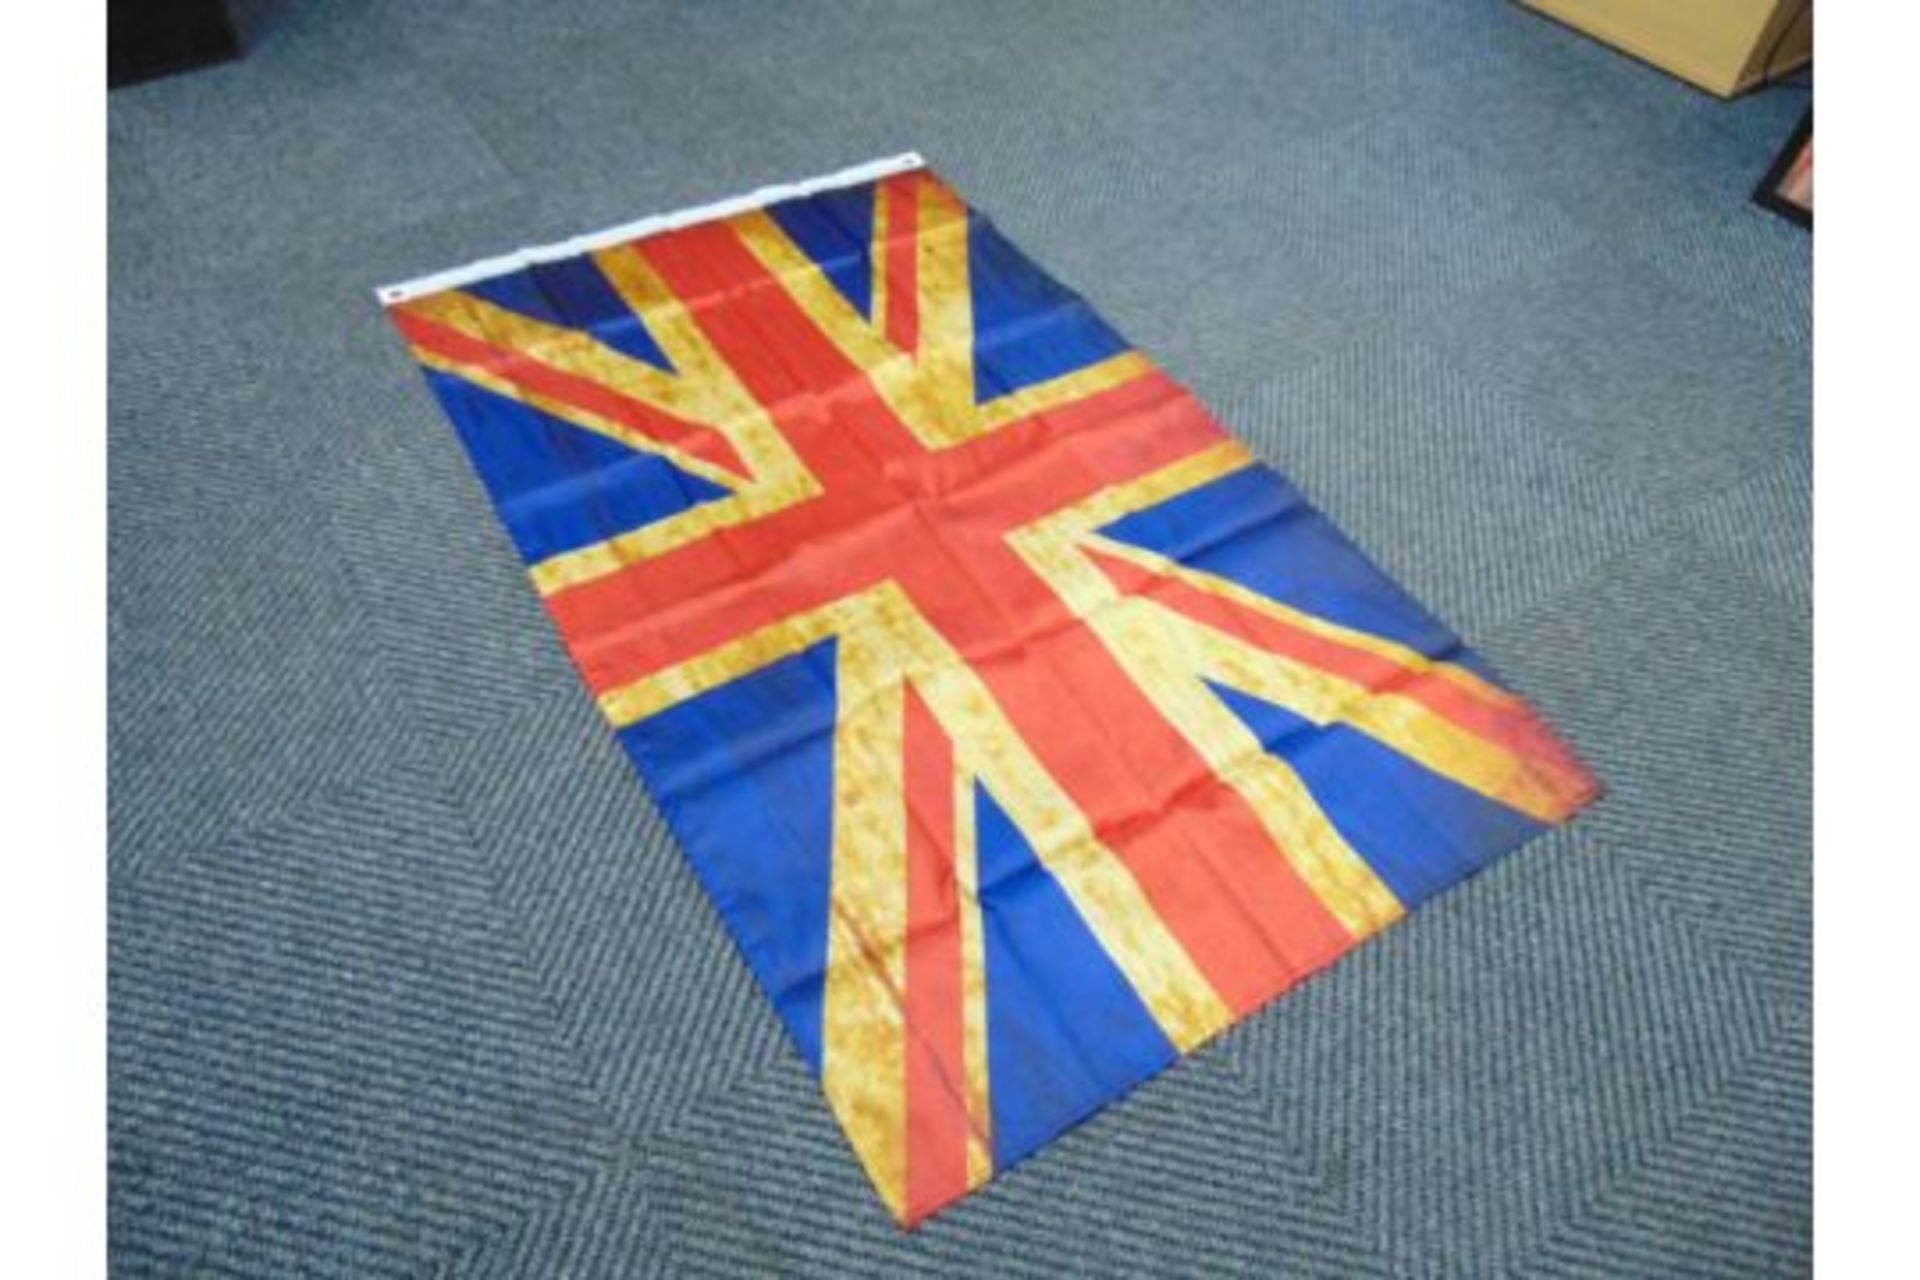 Union Jack Flag - 5ft x 3ft with Metal Eyelets. - Image 2 of 3